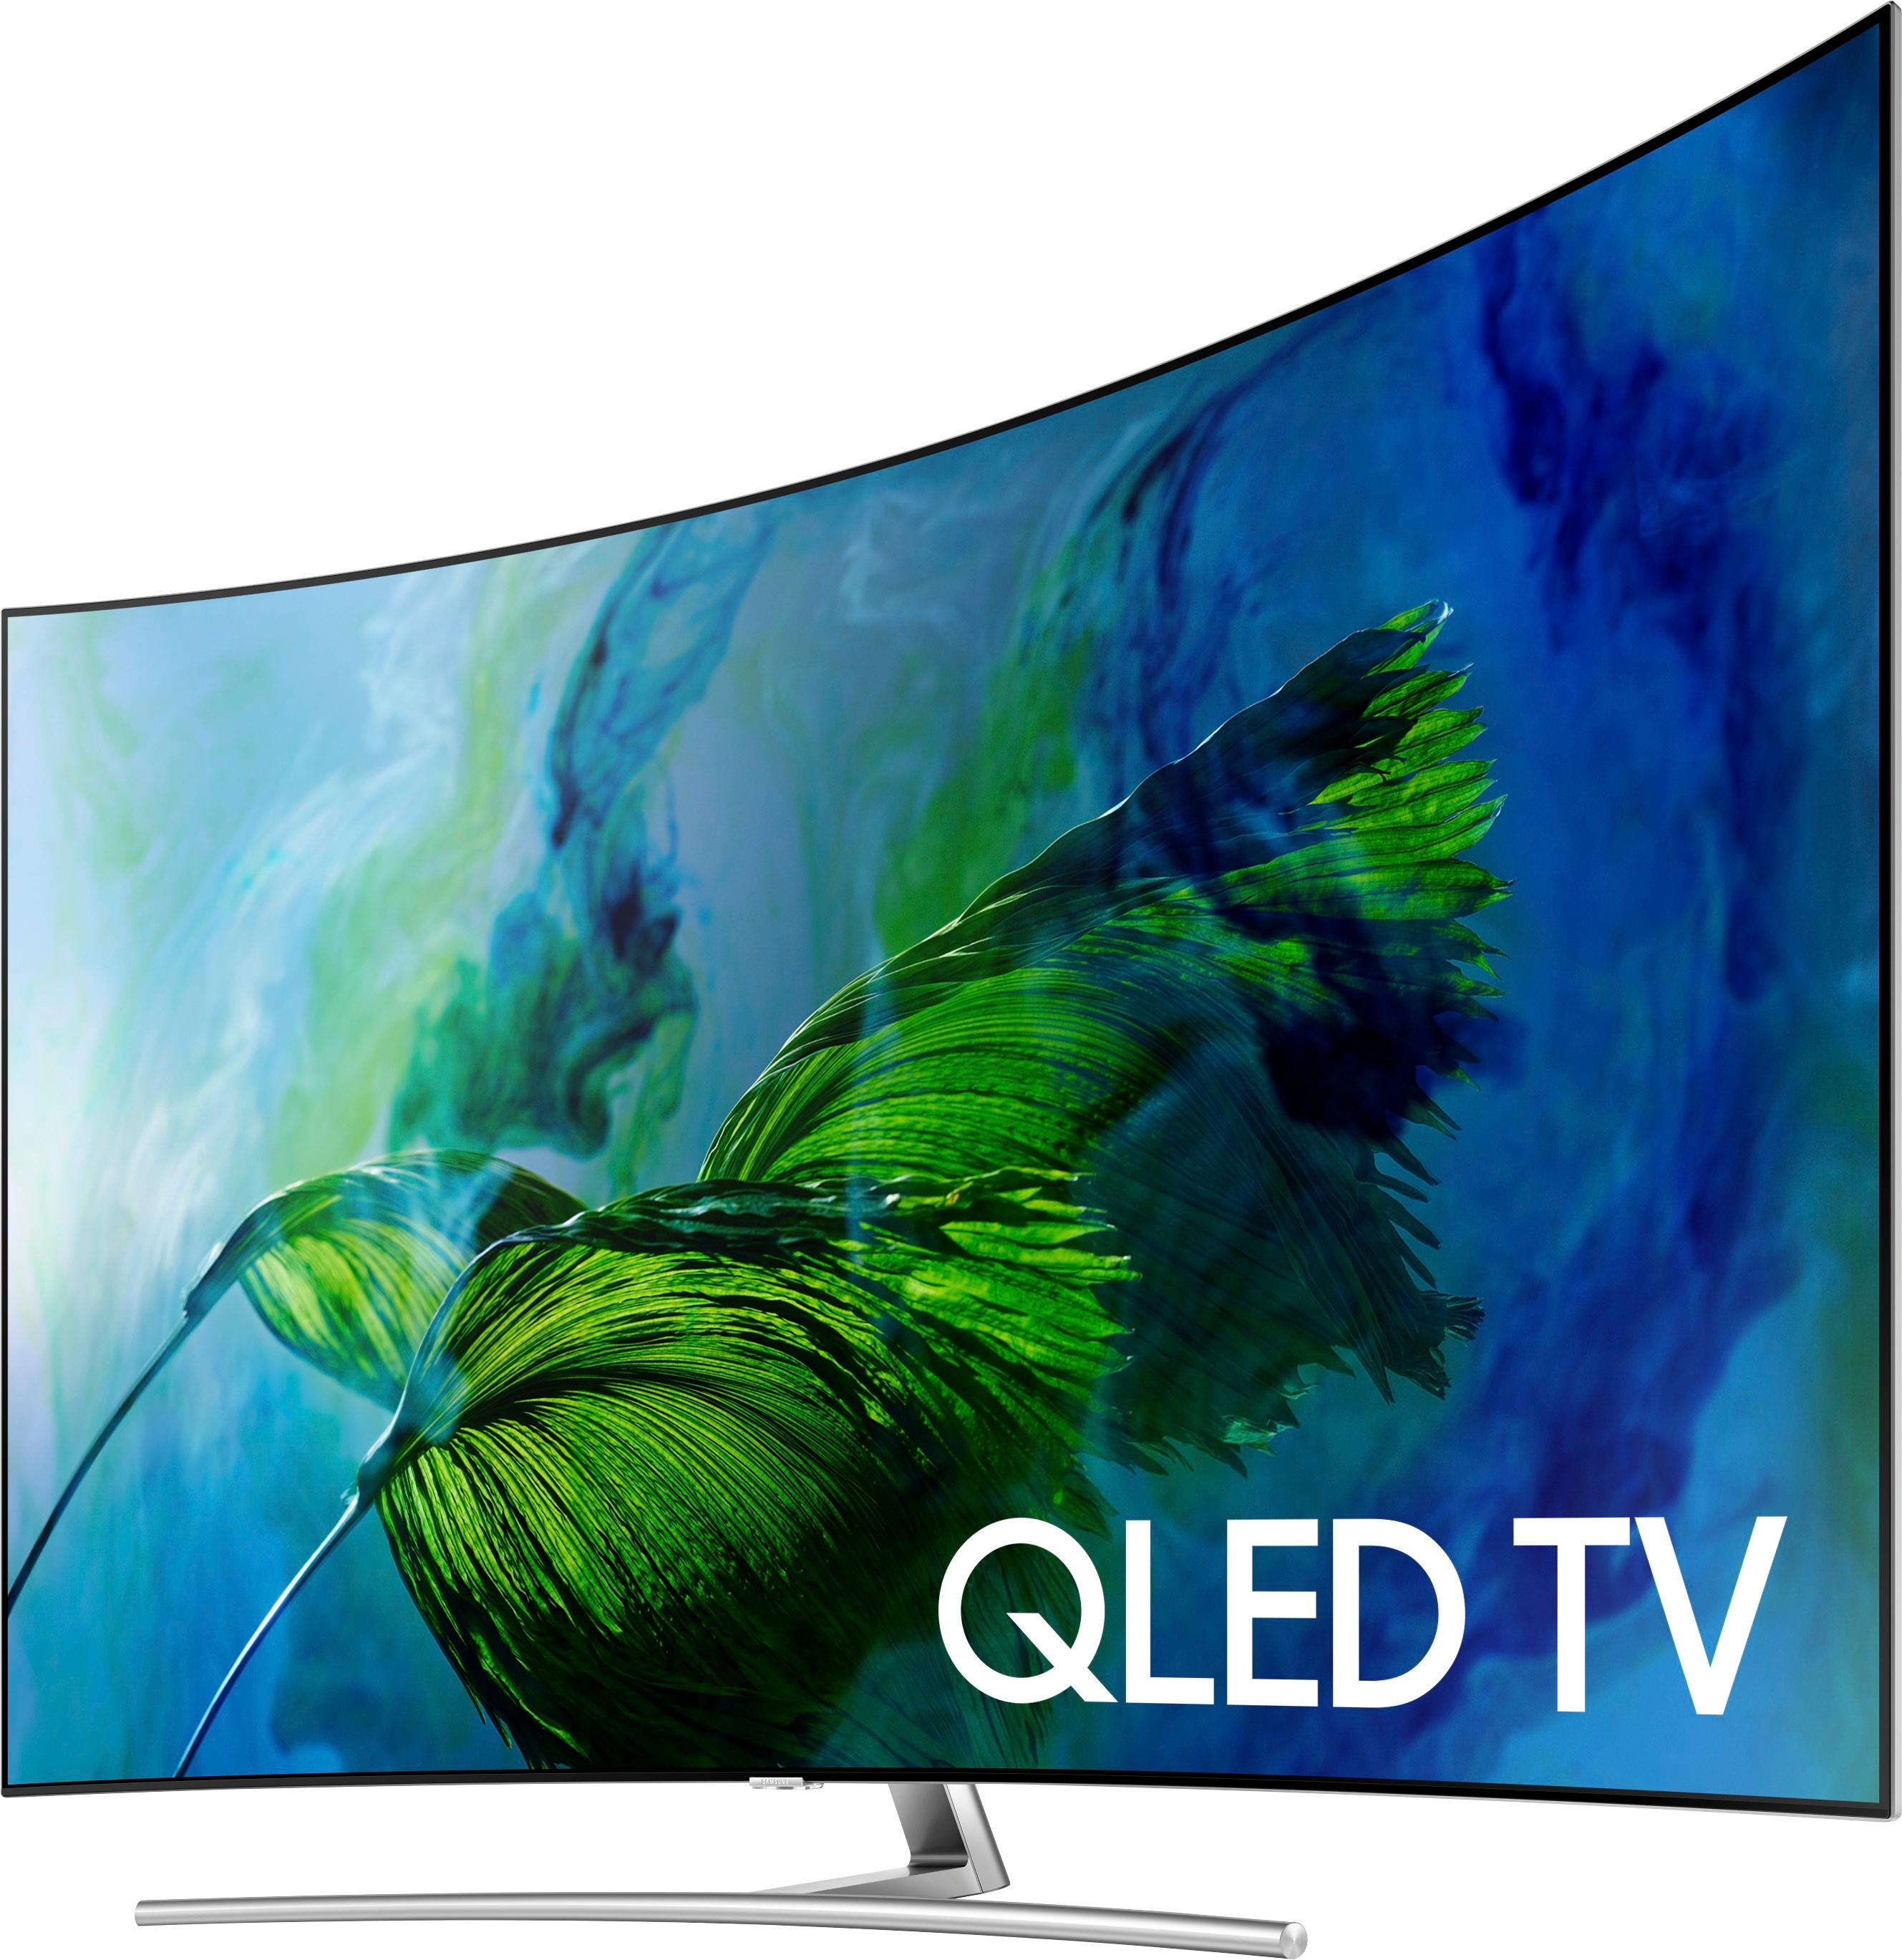 Samsung 55" Class LED Curved Q8C Series 2160p Smart 4K UHD TV with HDR